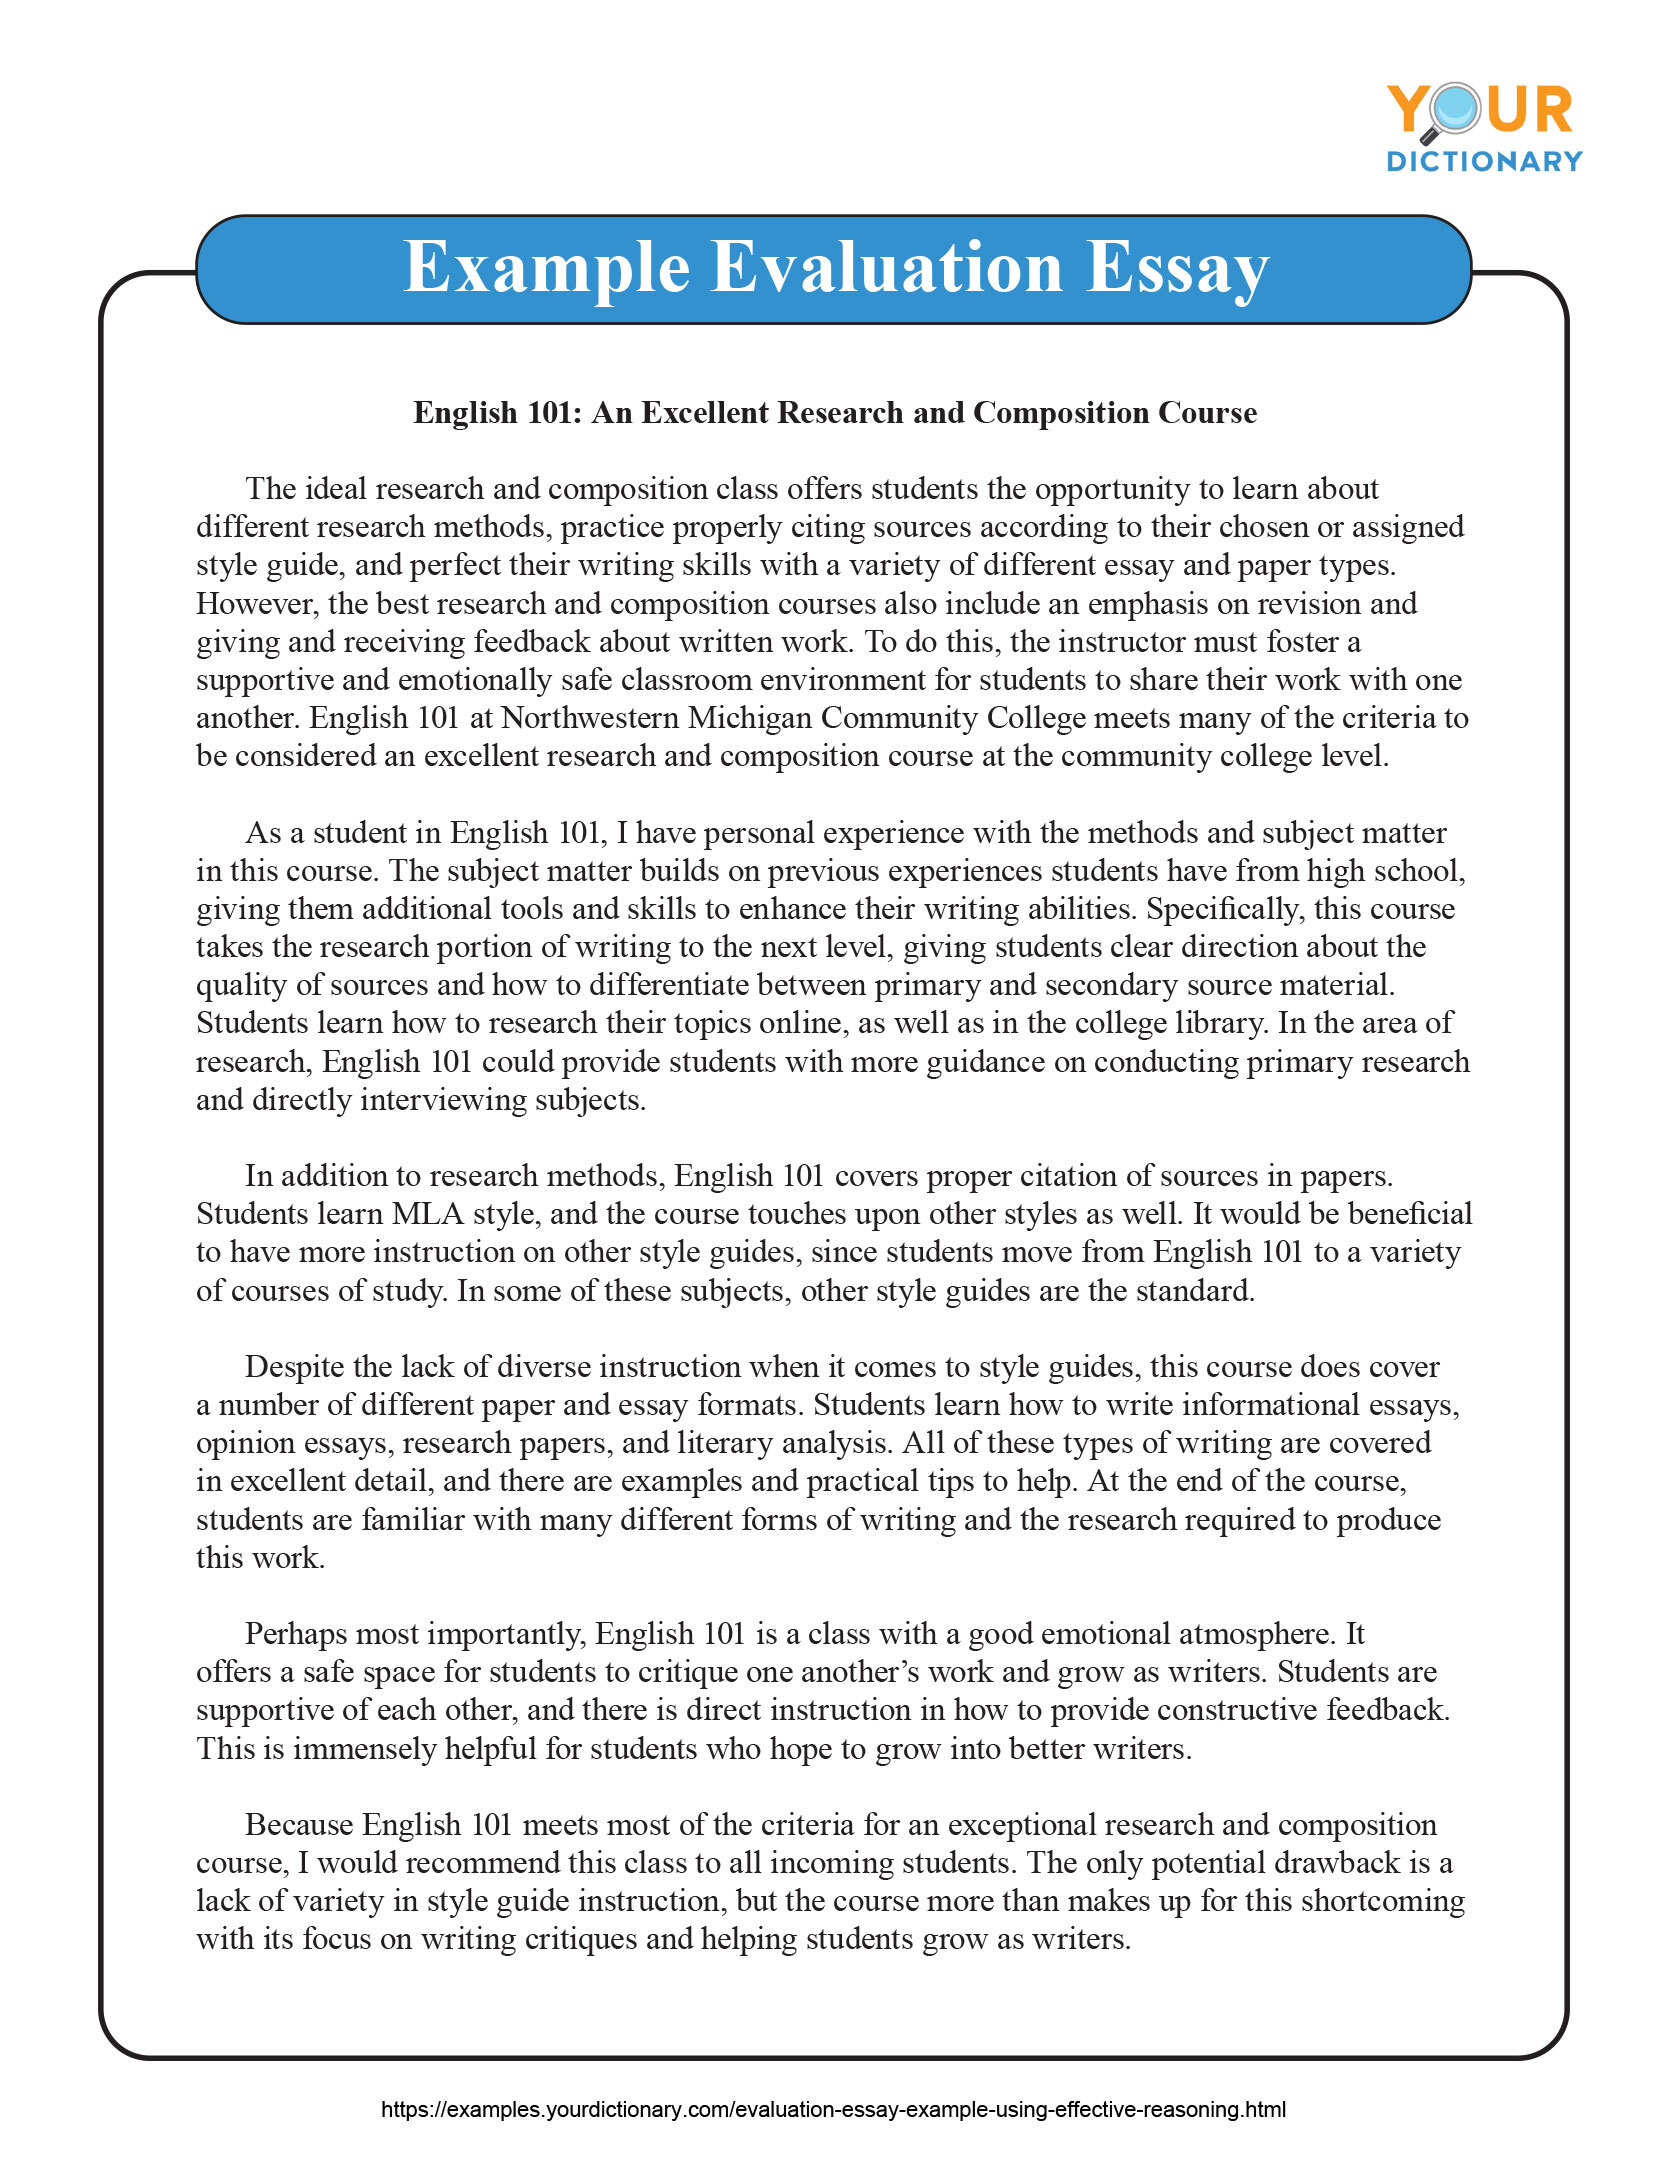 what is a good evaluation essay topic